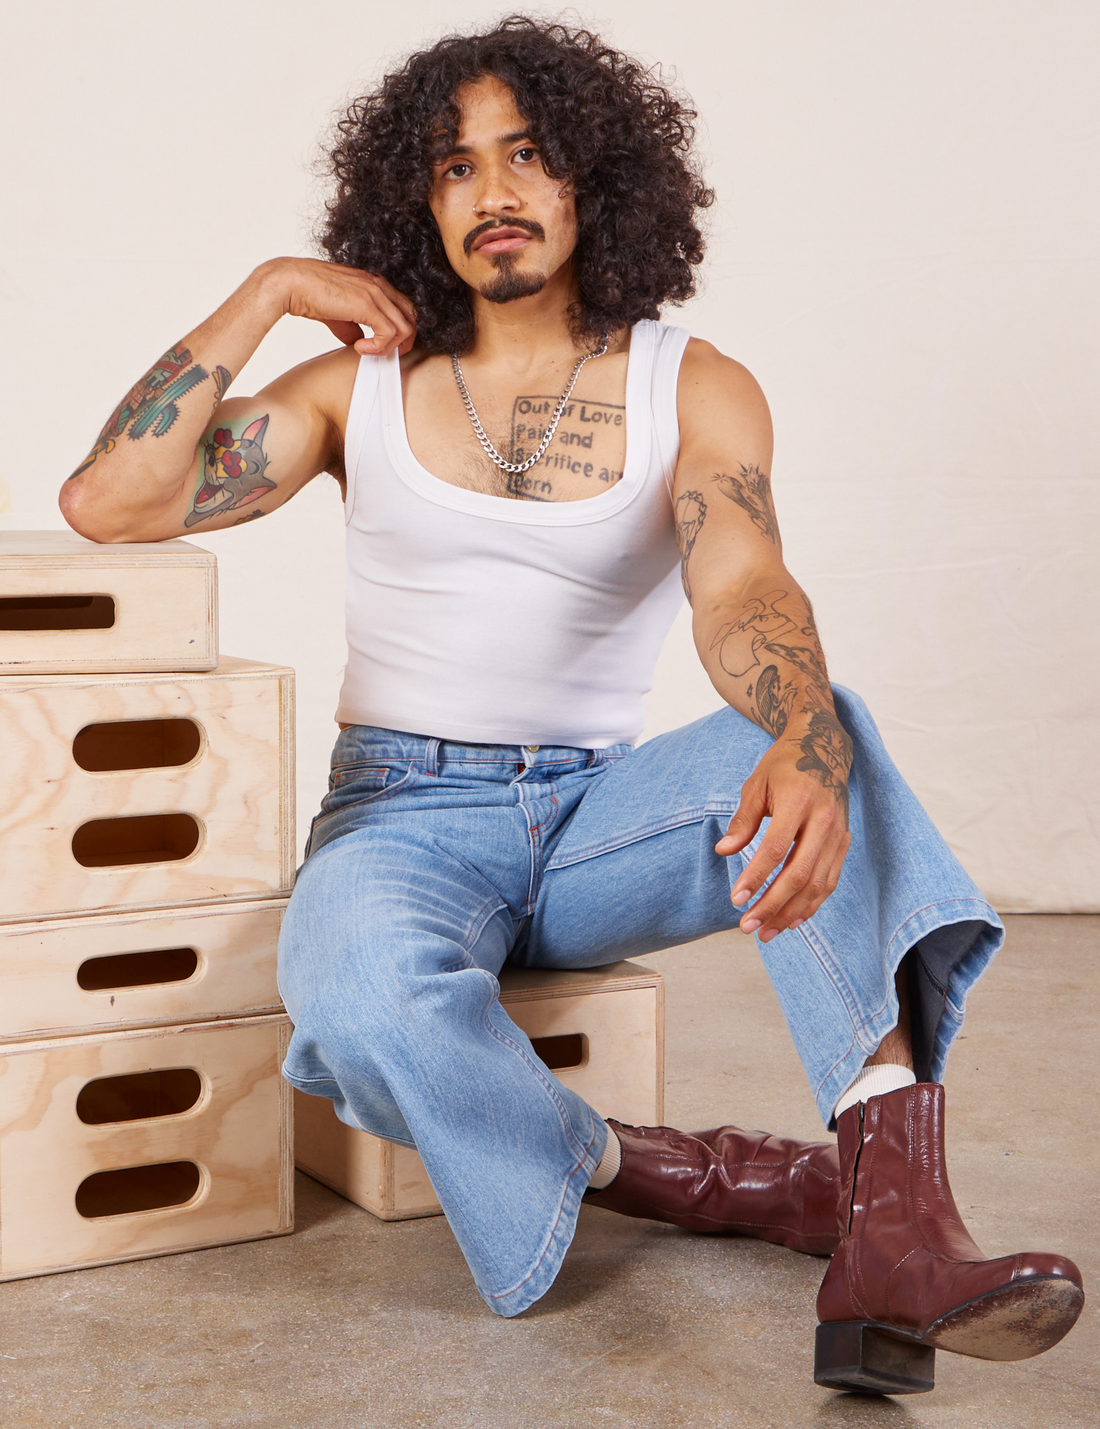 Jesse is wearing Cropped Tank Top in Vintage Off-White and sitting on a wooden crate